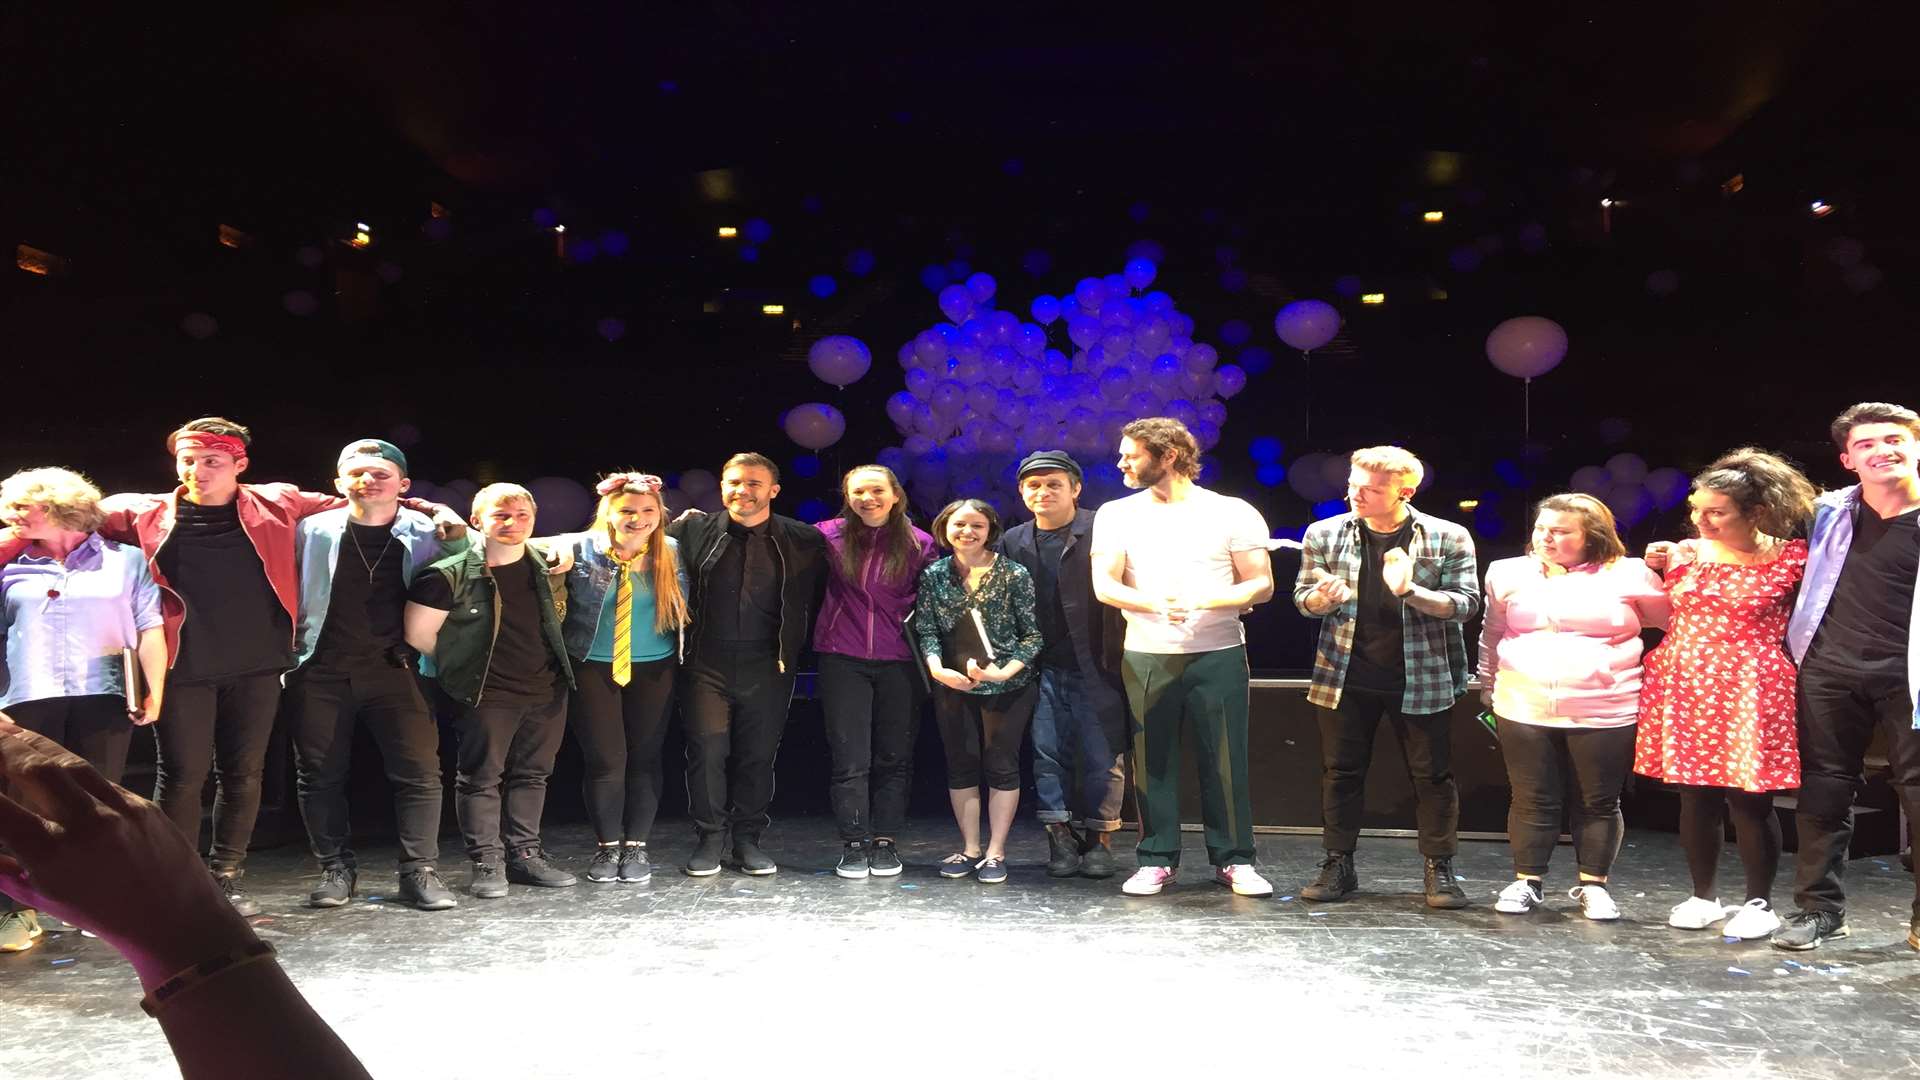 The cast and production team for The Band